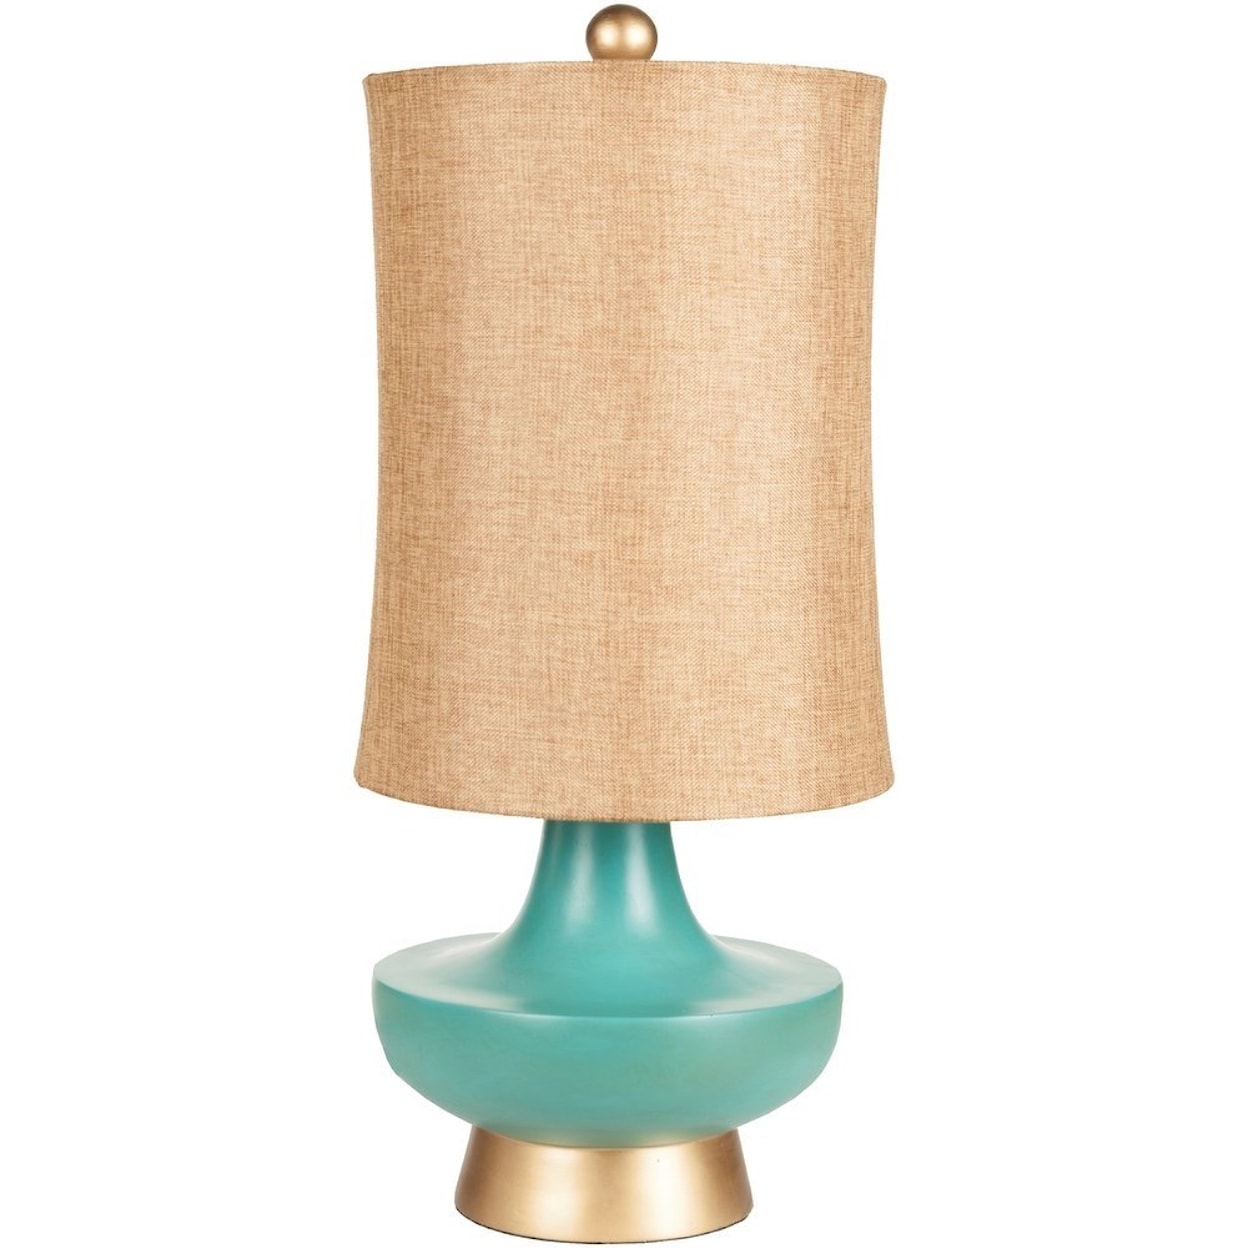 Surya Lamps Aged Turquoise Global Table Lamp